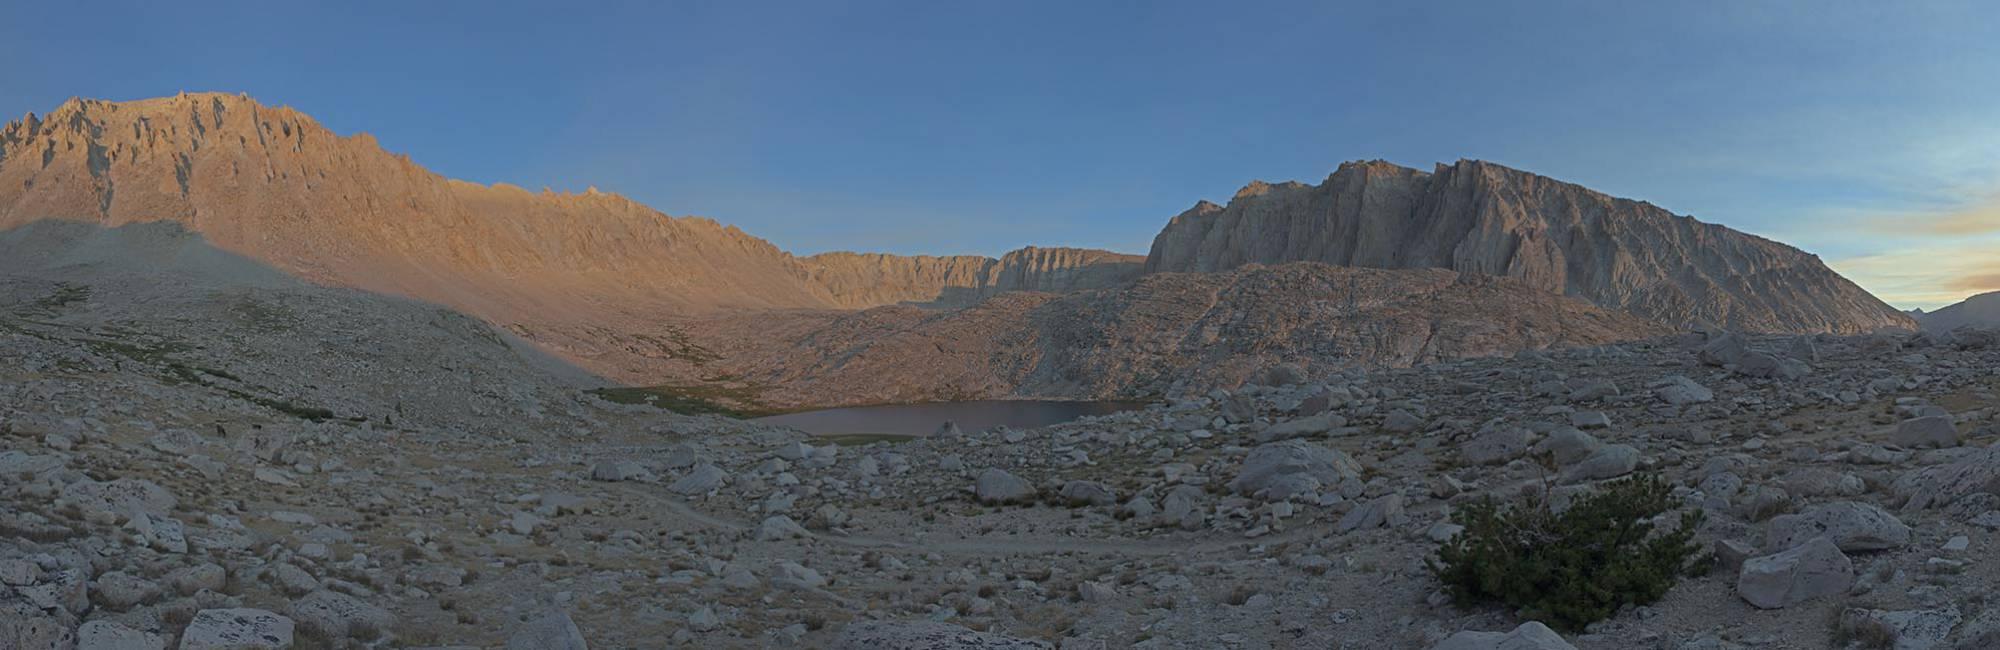 Mt. Whitney (left), highest point in Lower 48 states, over Guitar Lake, Sequoia National Park.